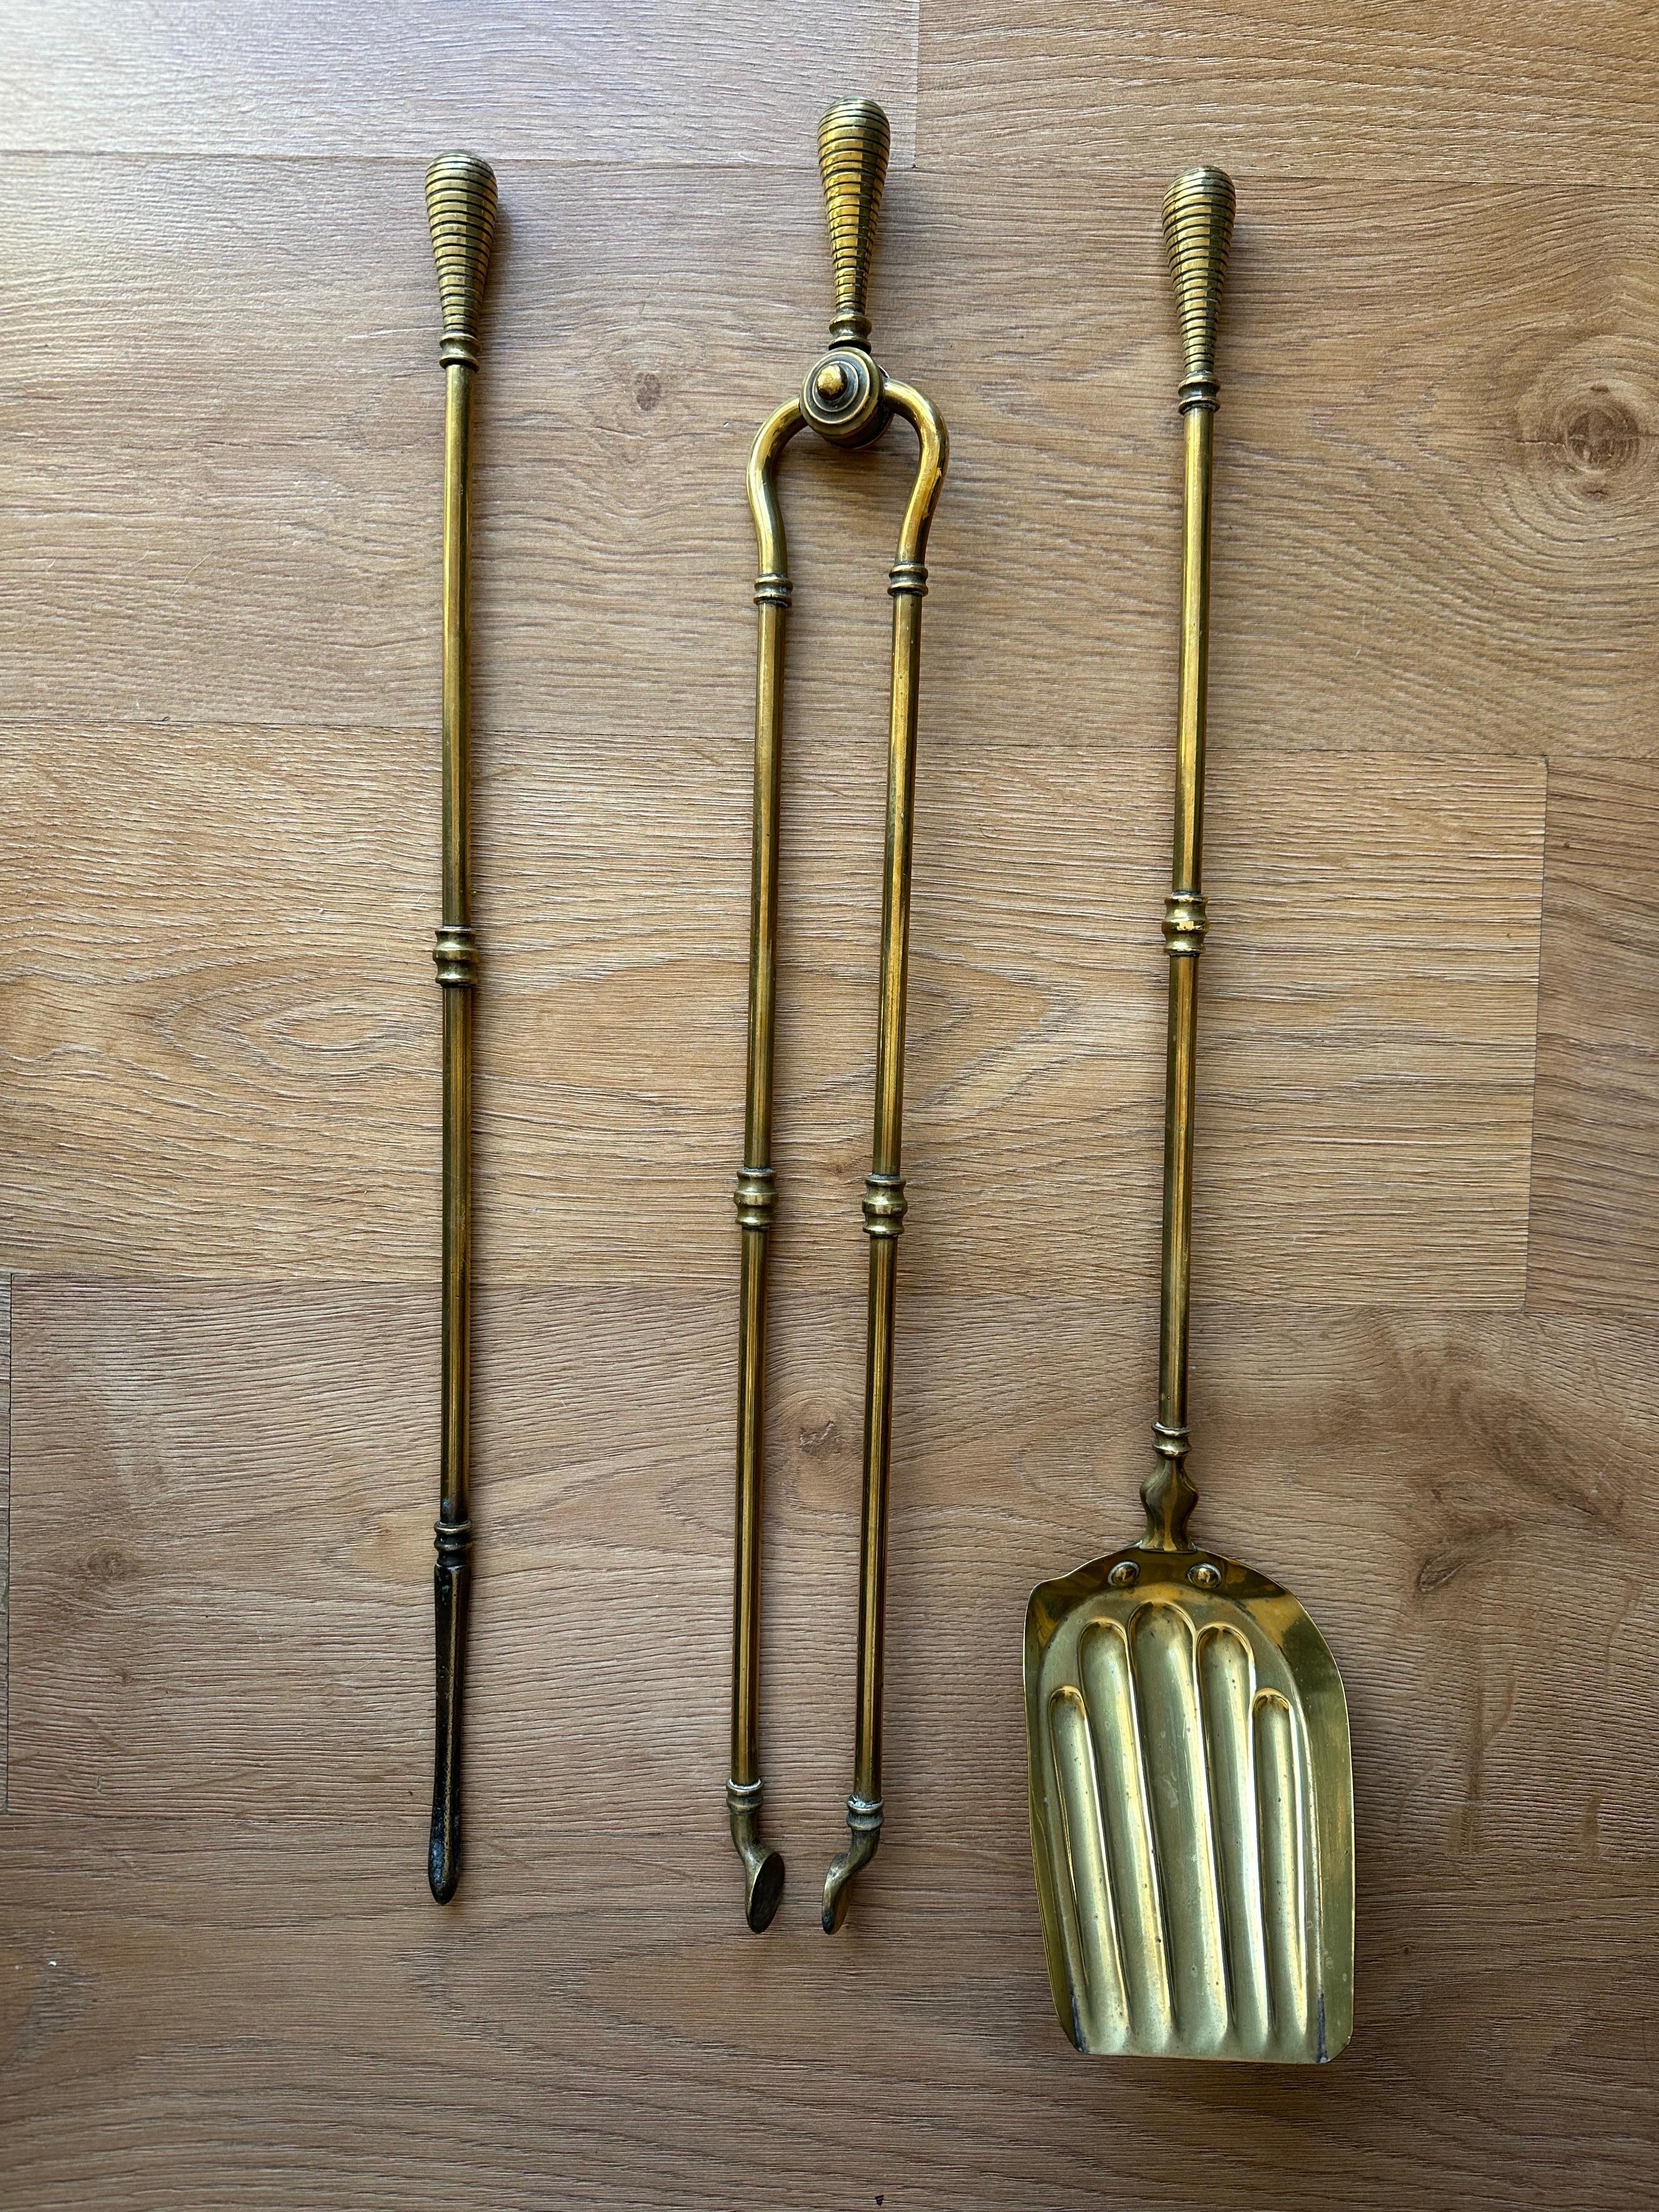 A stunning and unique antique Victorian brass fire companion set. The superb set is solid brass, with beautiful twirl top motif. With matching the elegant yet powerful impression the set provides. This is truly a remarkable set, with fantastic